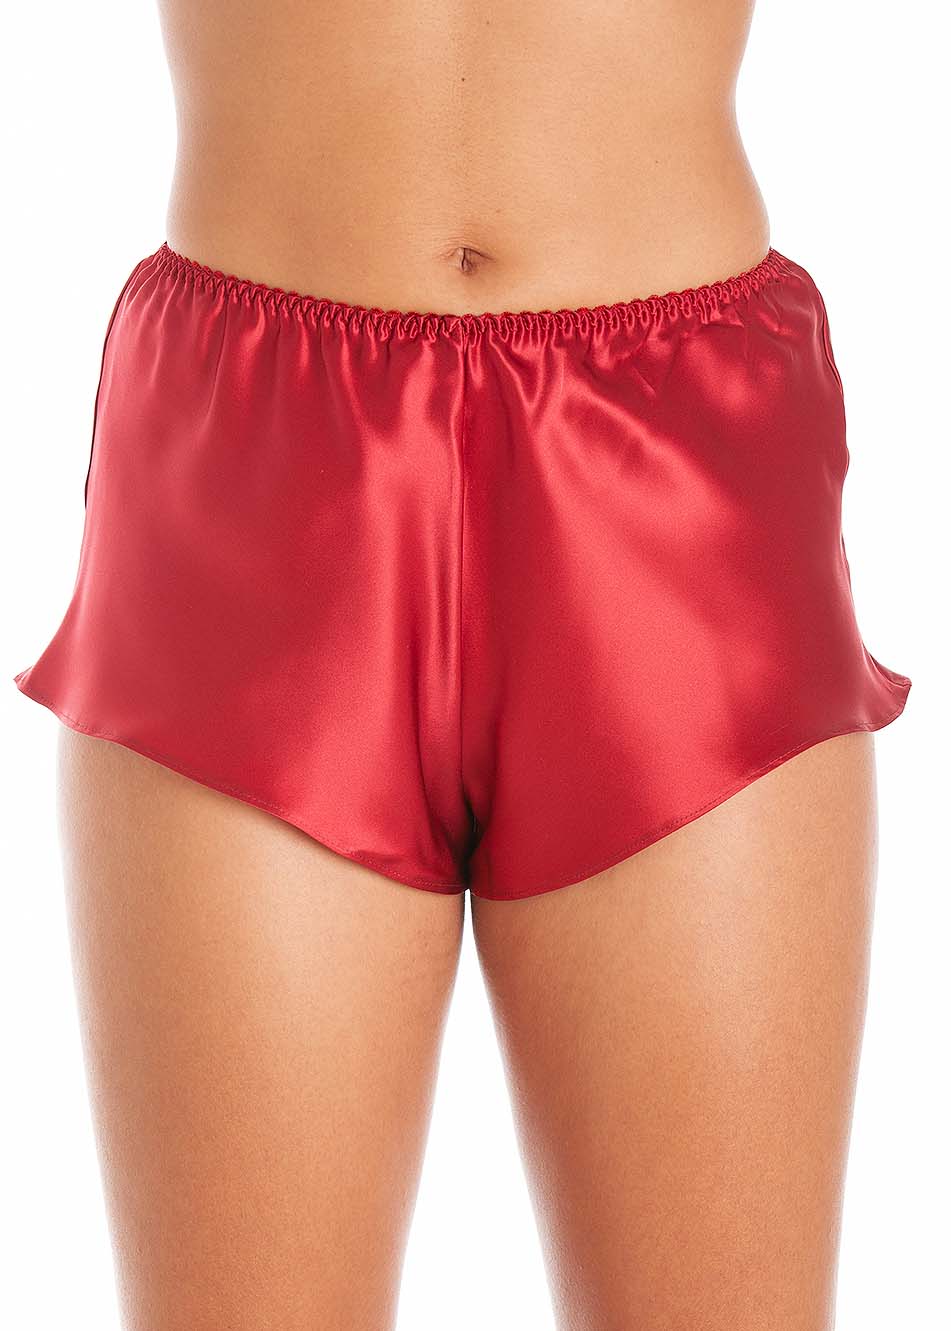 Cranberry silk French knickers